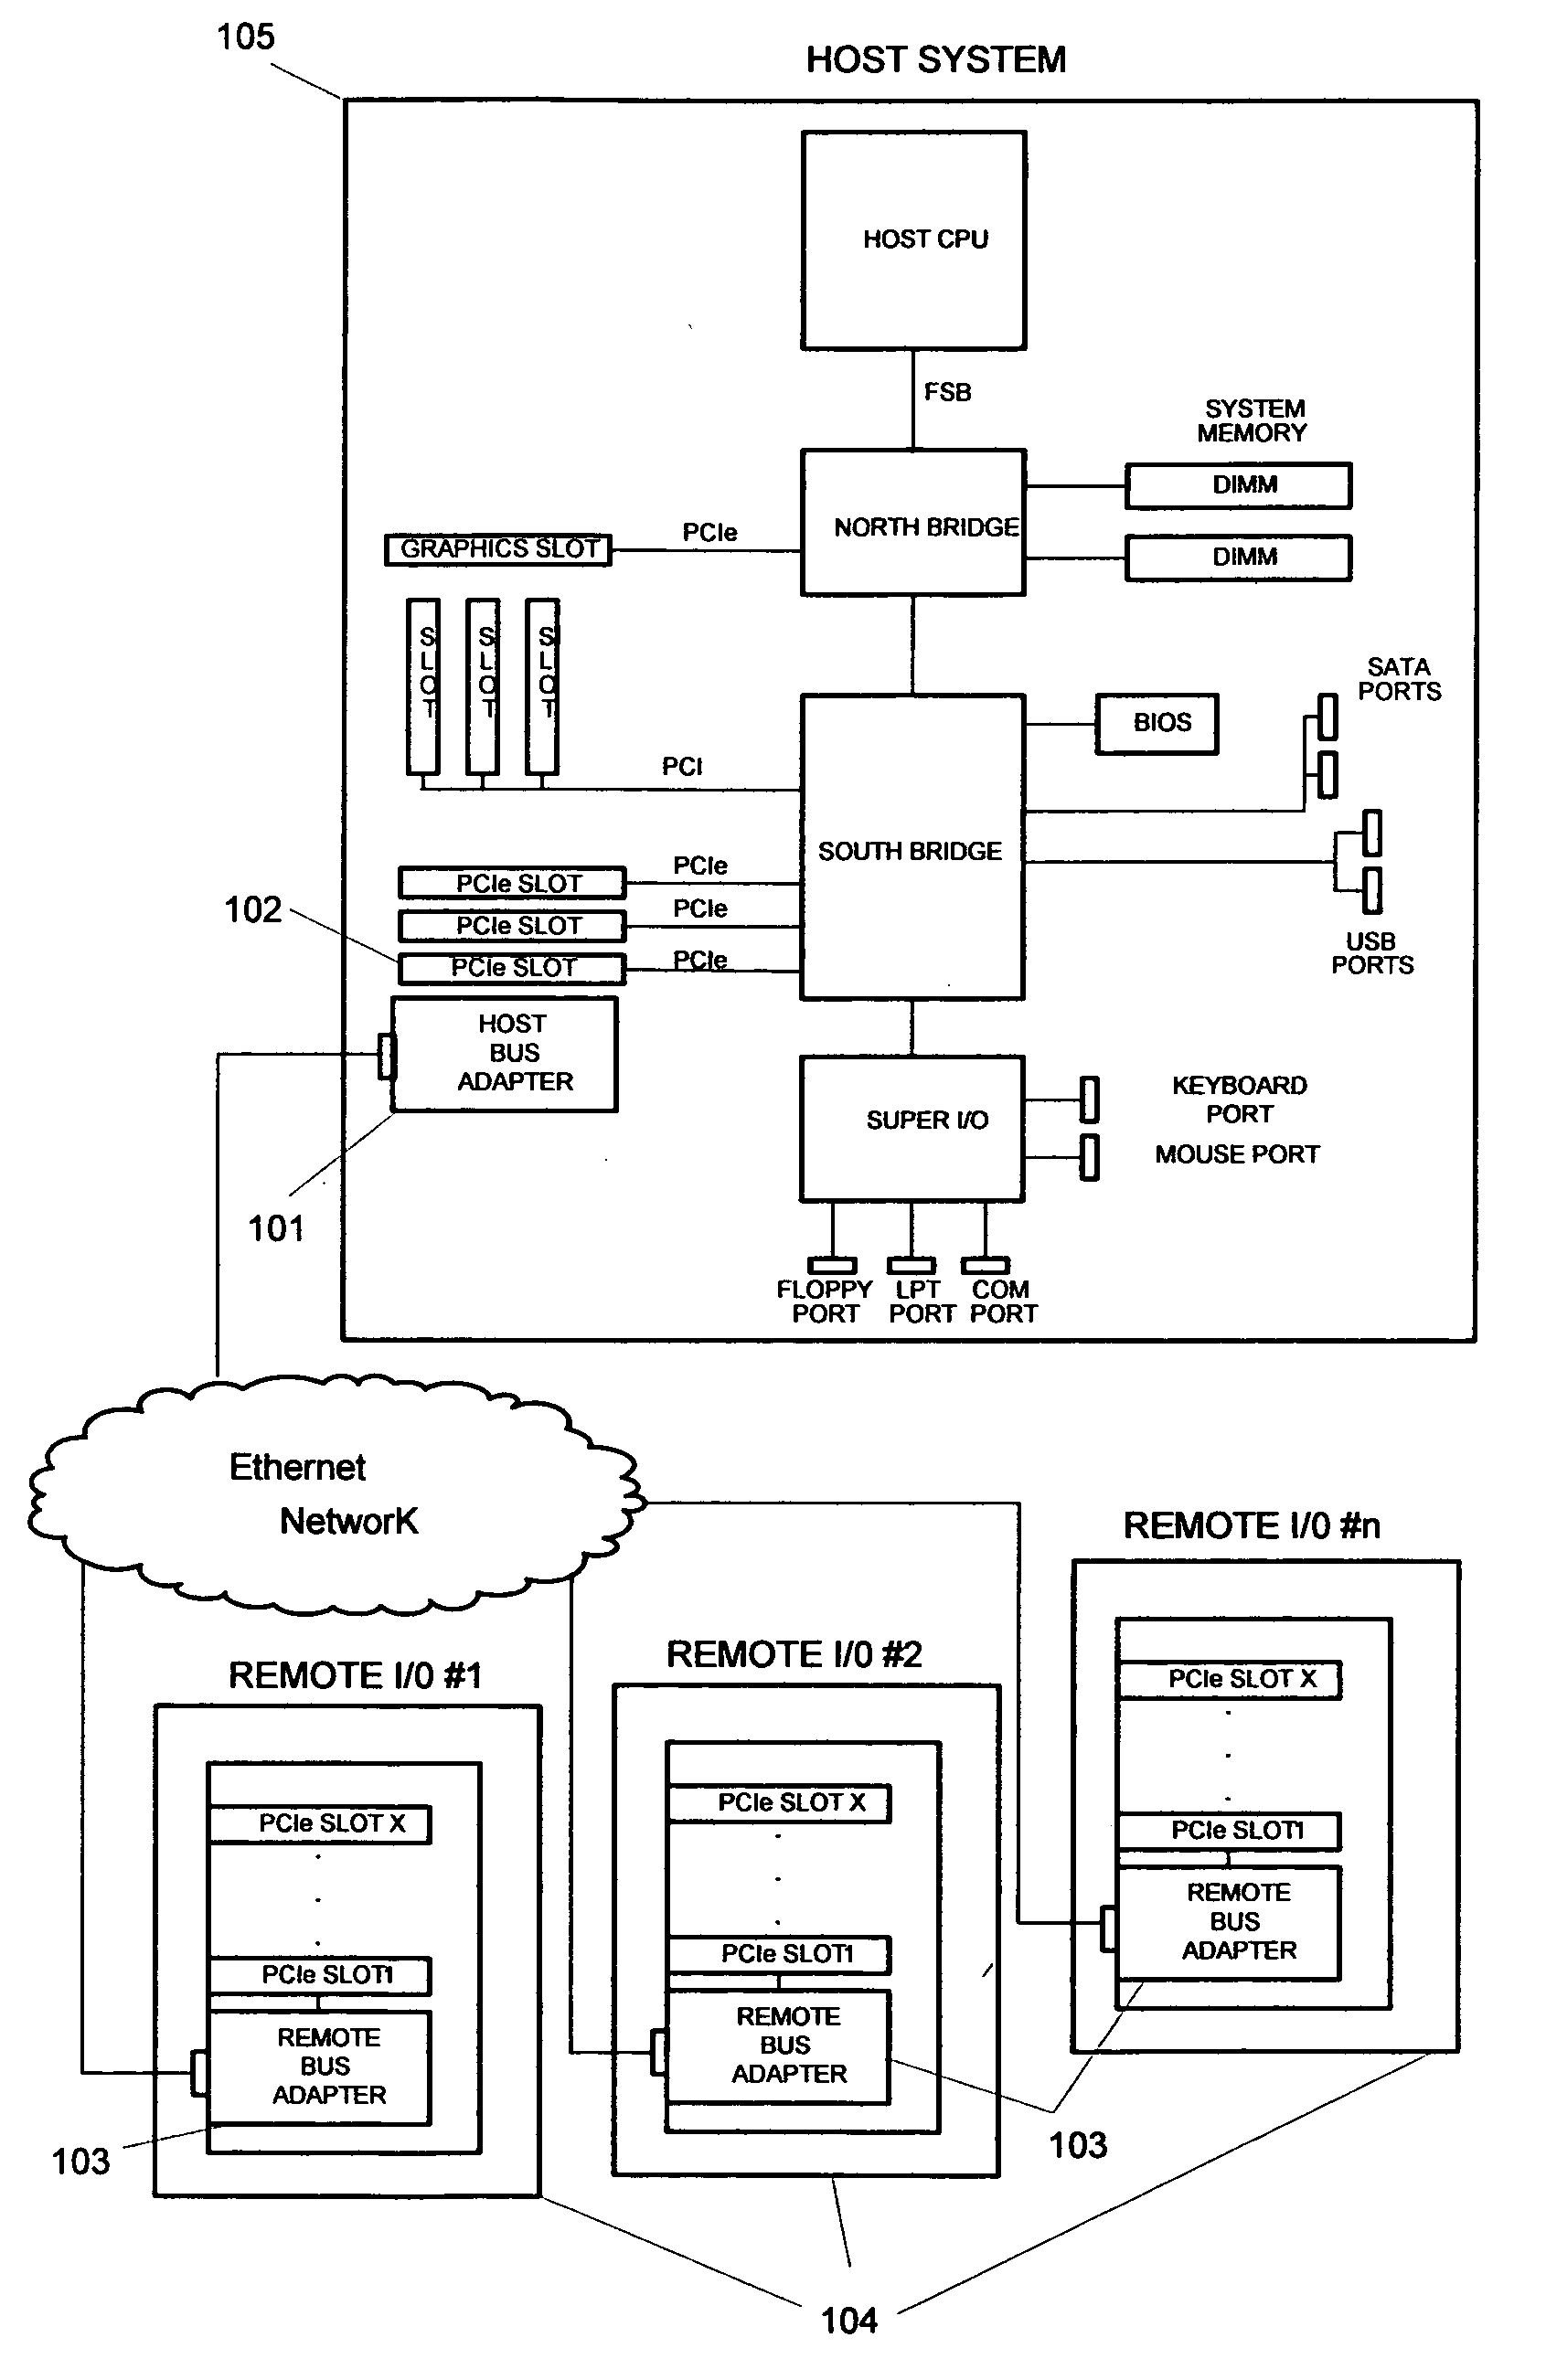 Memory space management and mapping for memory area network